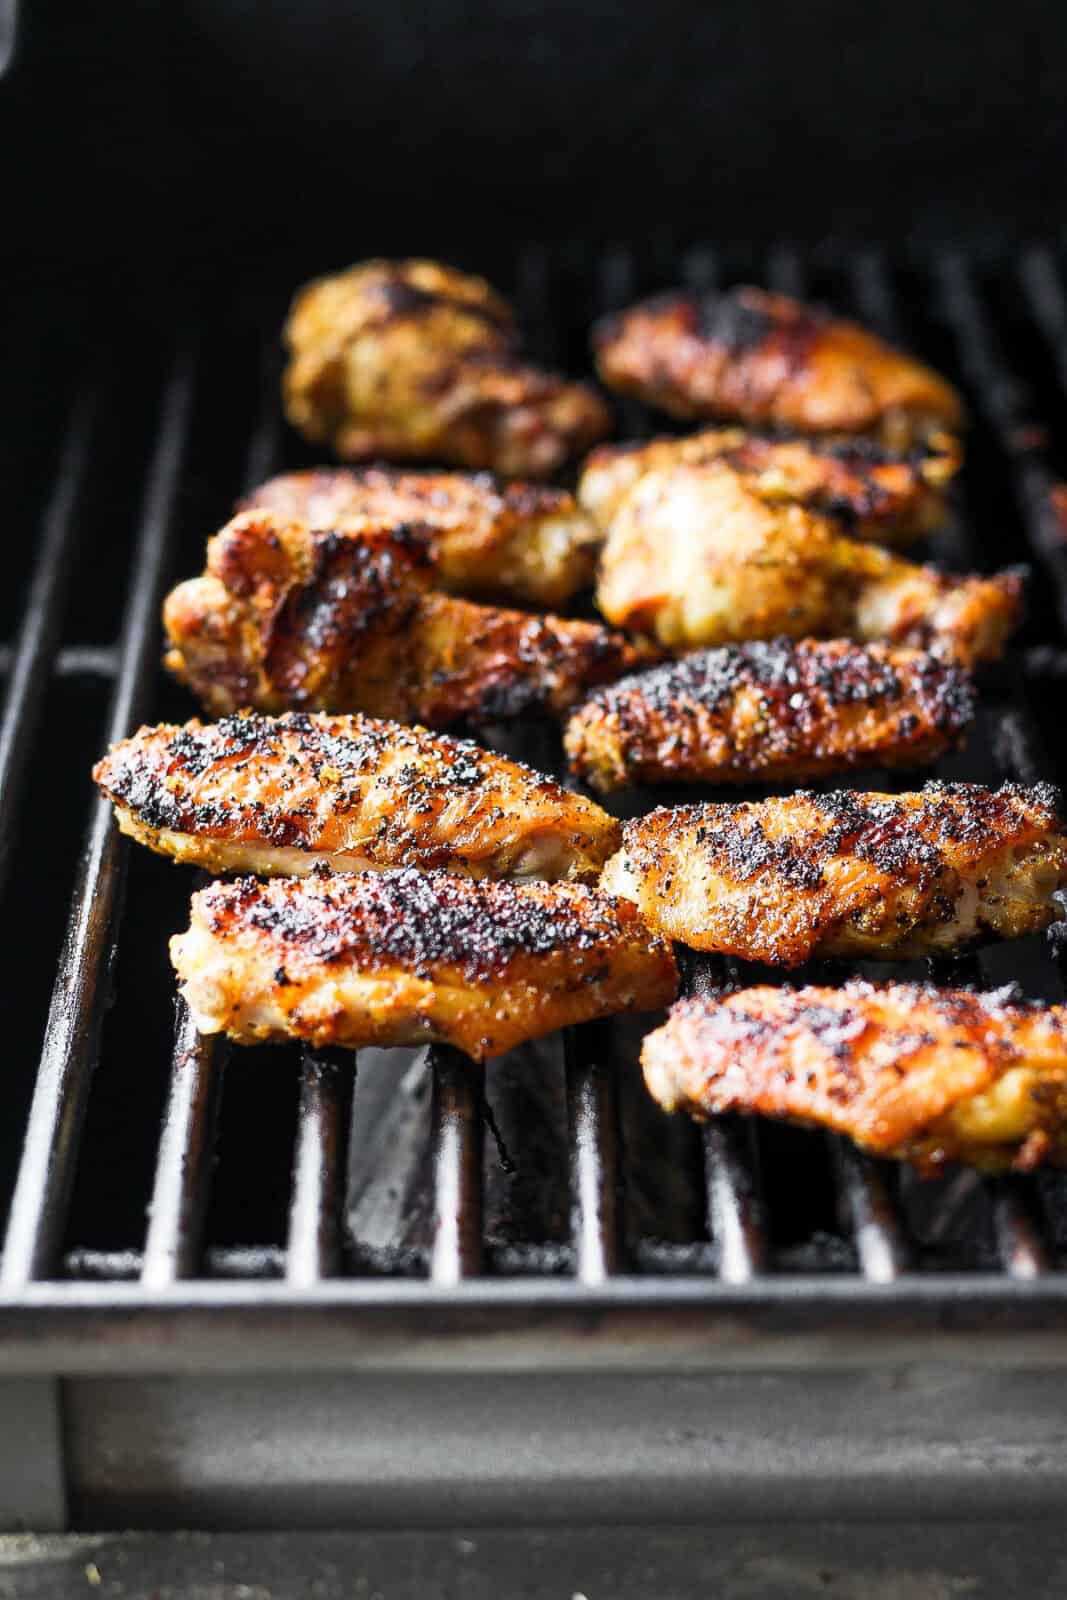 Chicken wings on the grill.